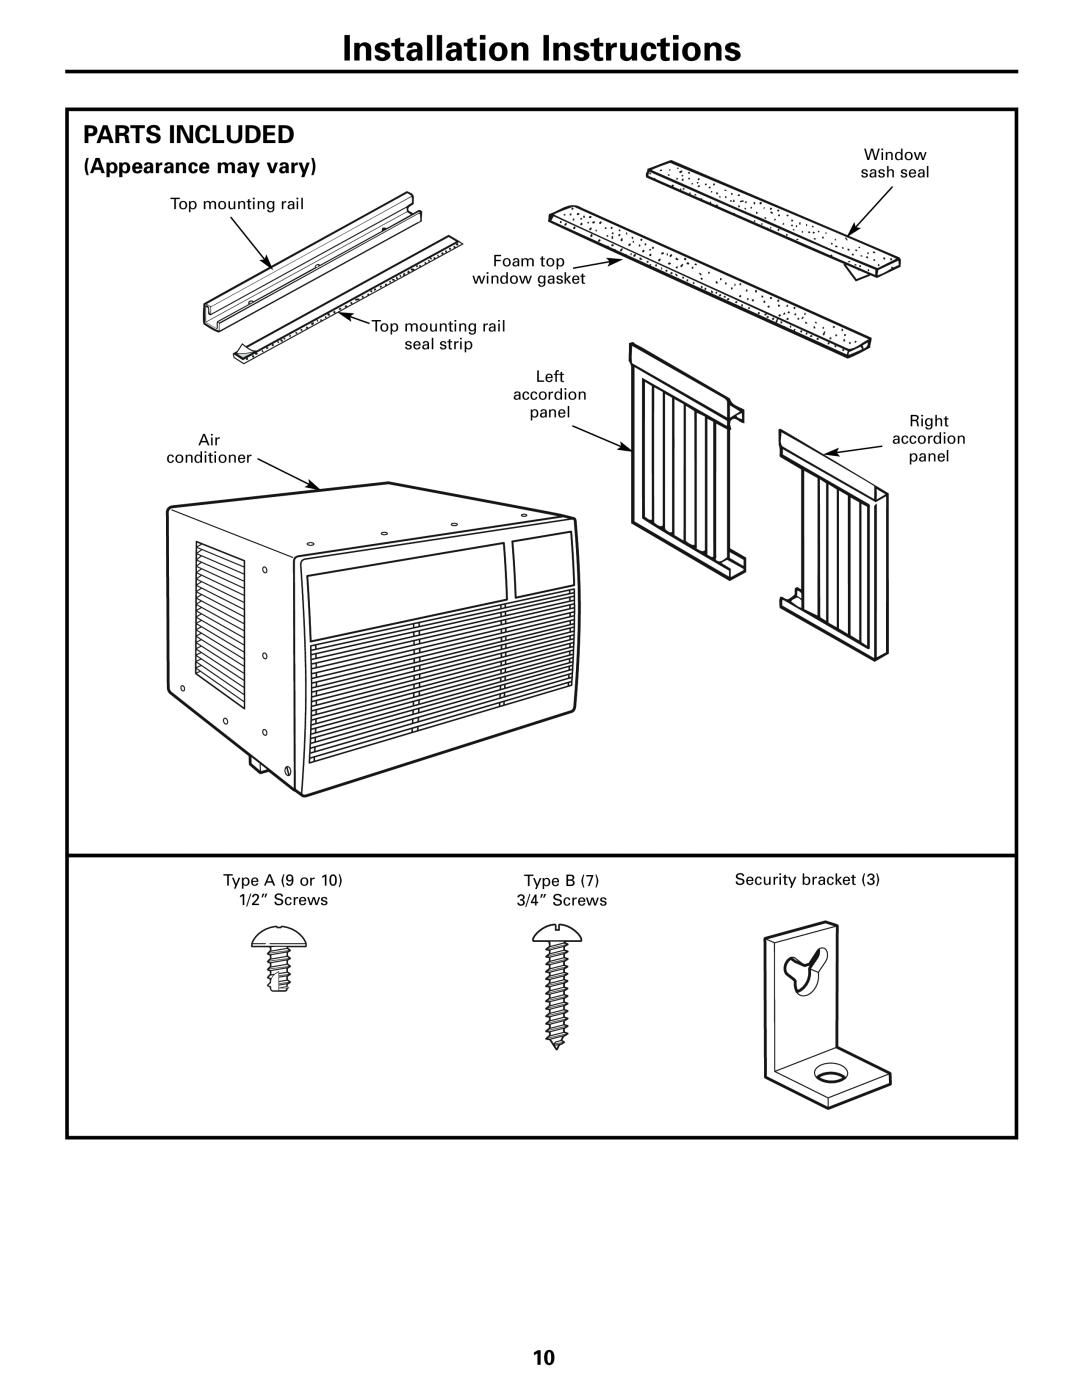 GE ASM06* installation instructions Installation Instructions, Parts Included, Appearance may vary 